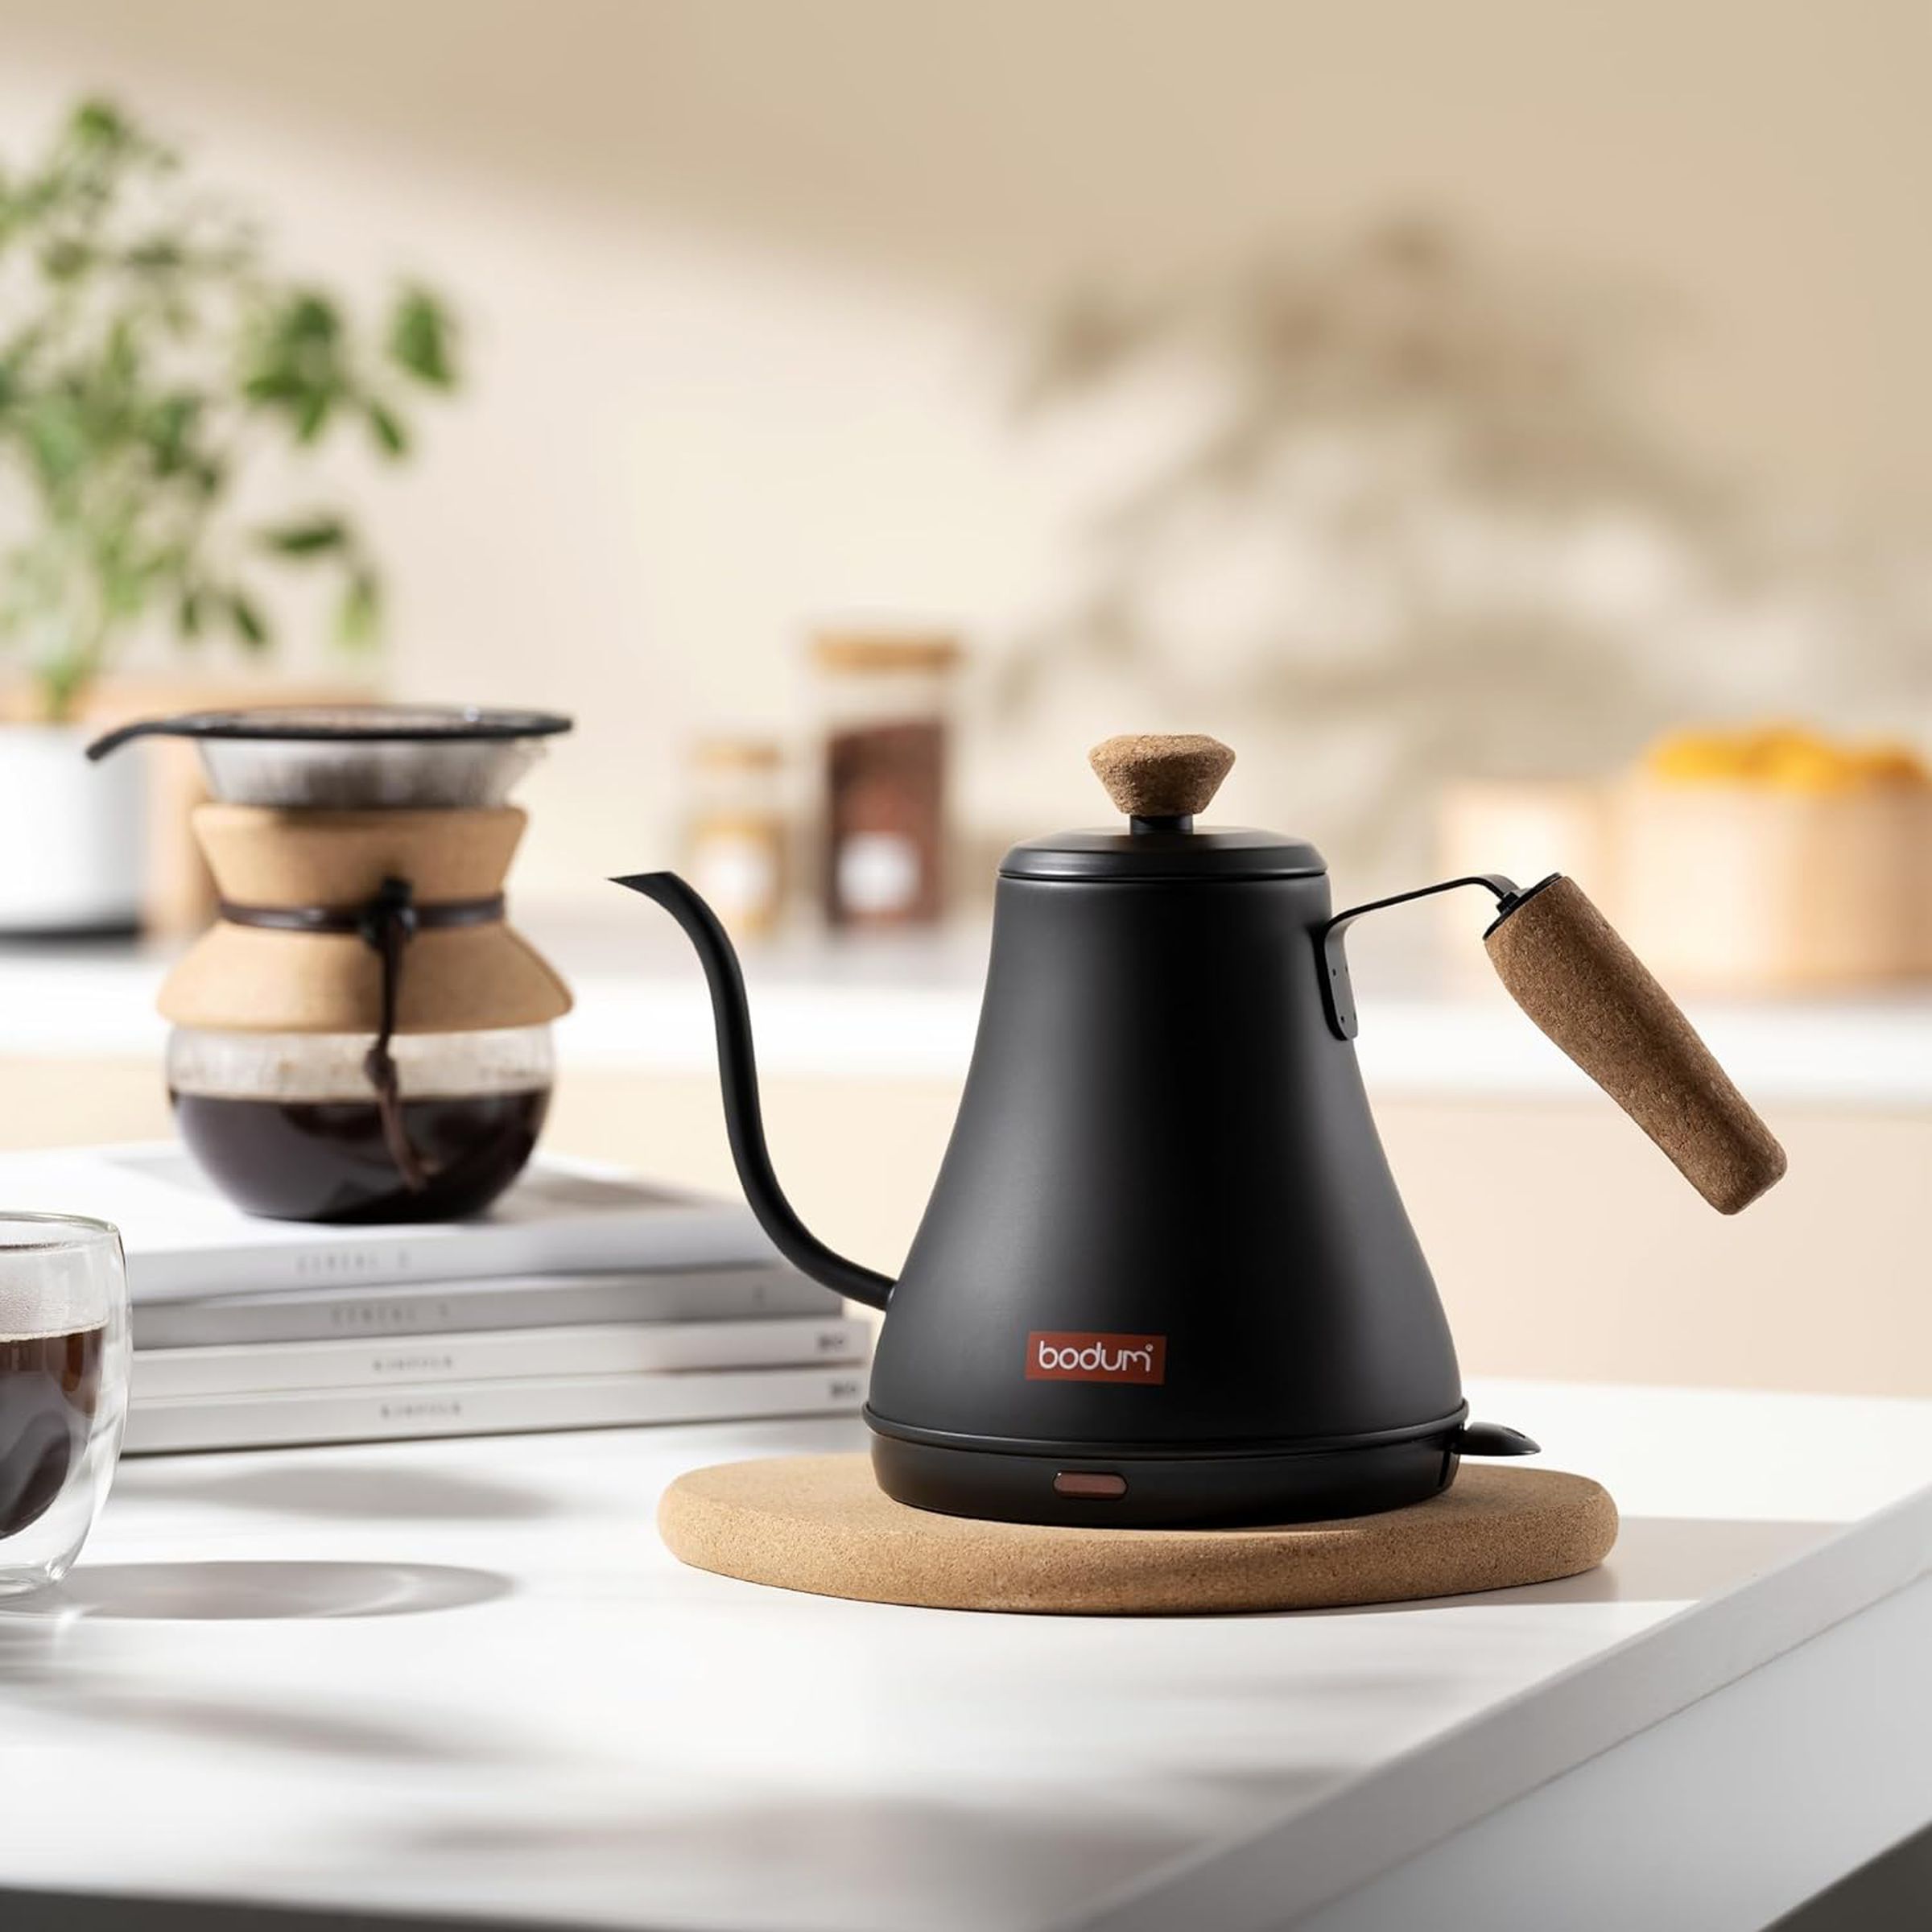 Black gooseneck electric kettle on a table, a pot of coffee in the background.